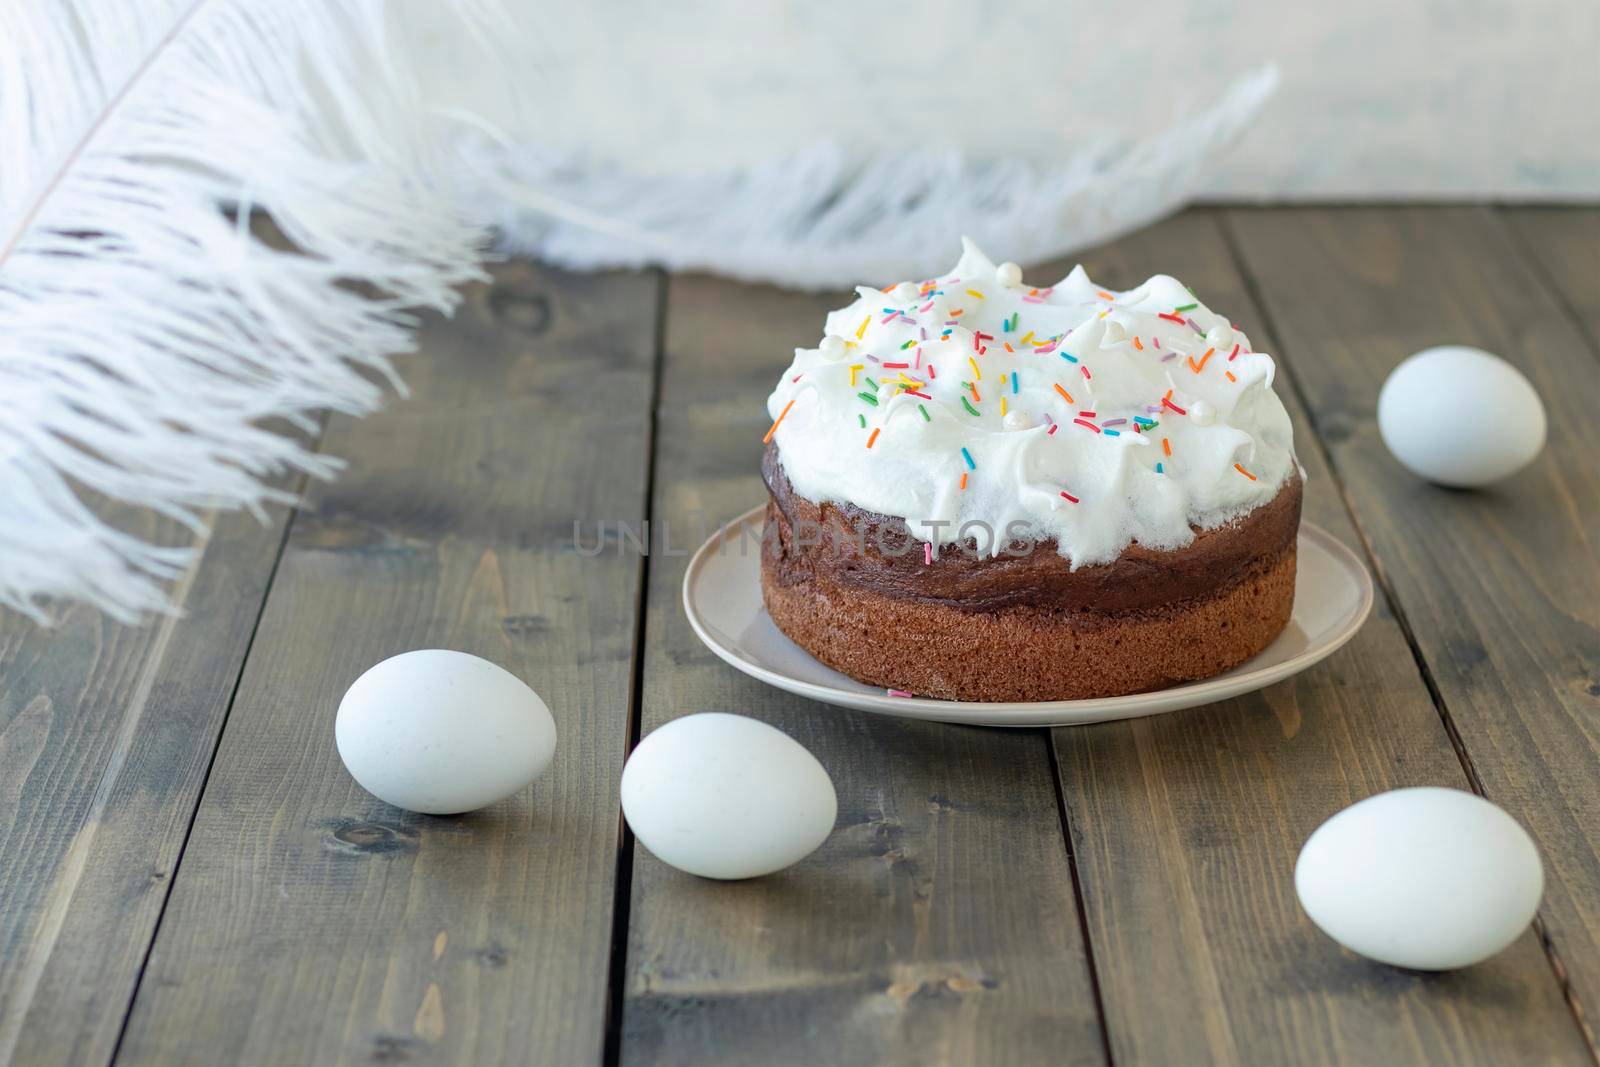 white Easter cake with colored sweet sprinkles near eggs and feathers on a wooden background. Happy easter concept by Leoschka